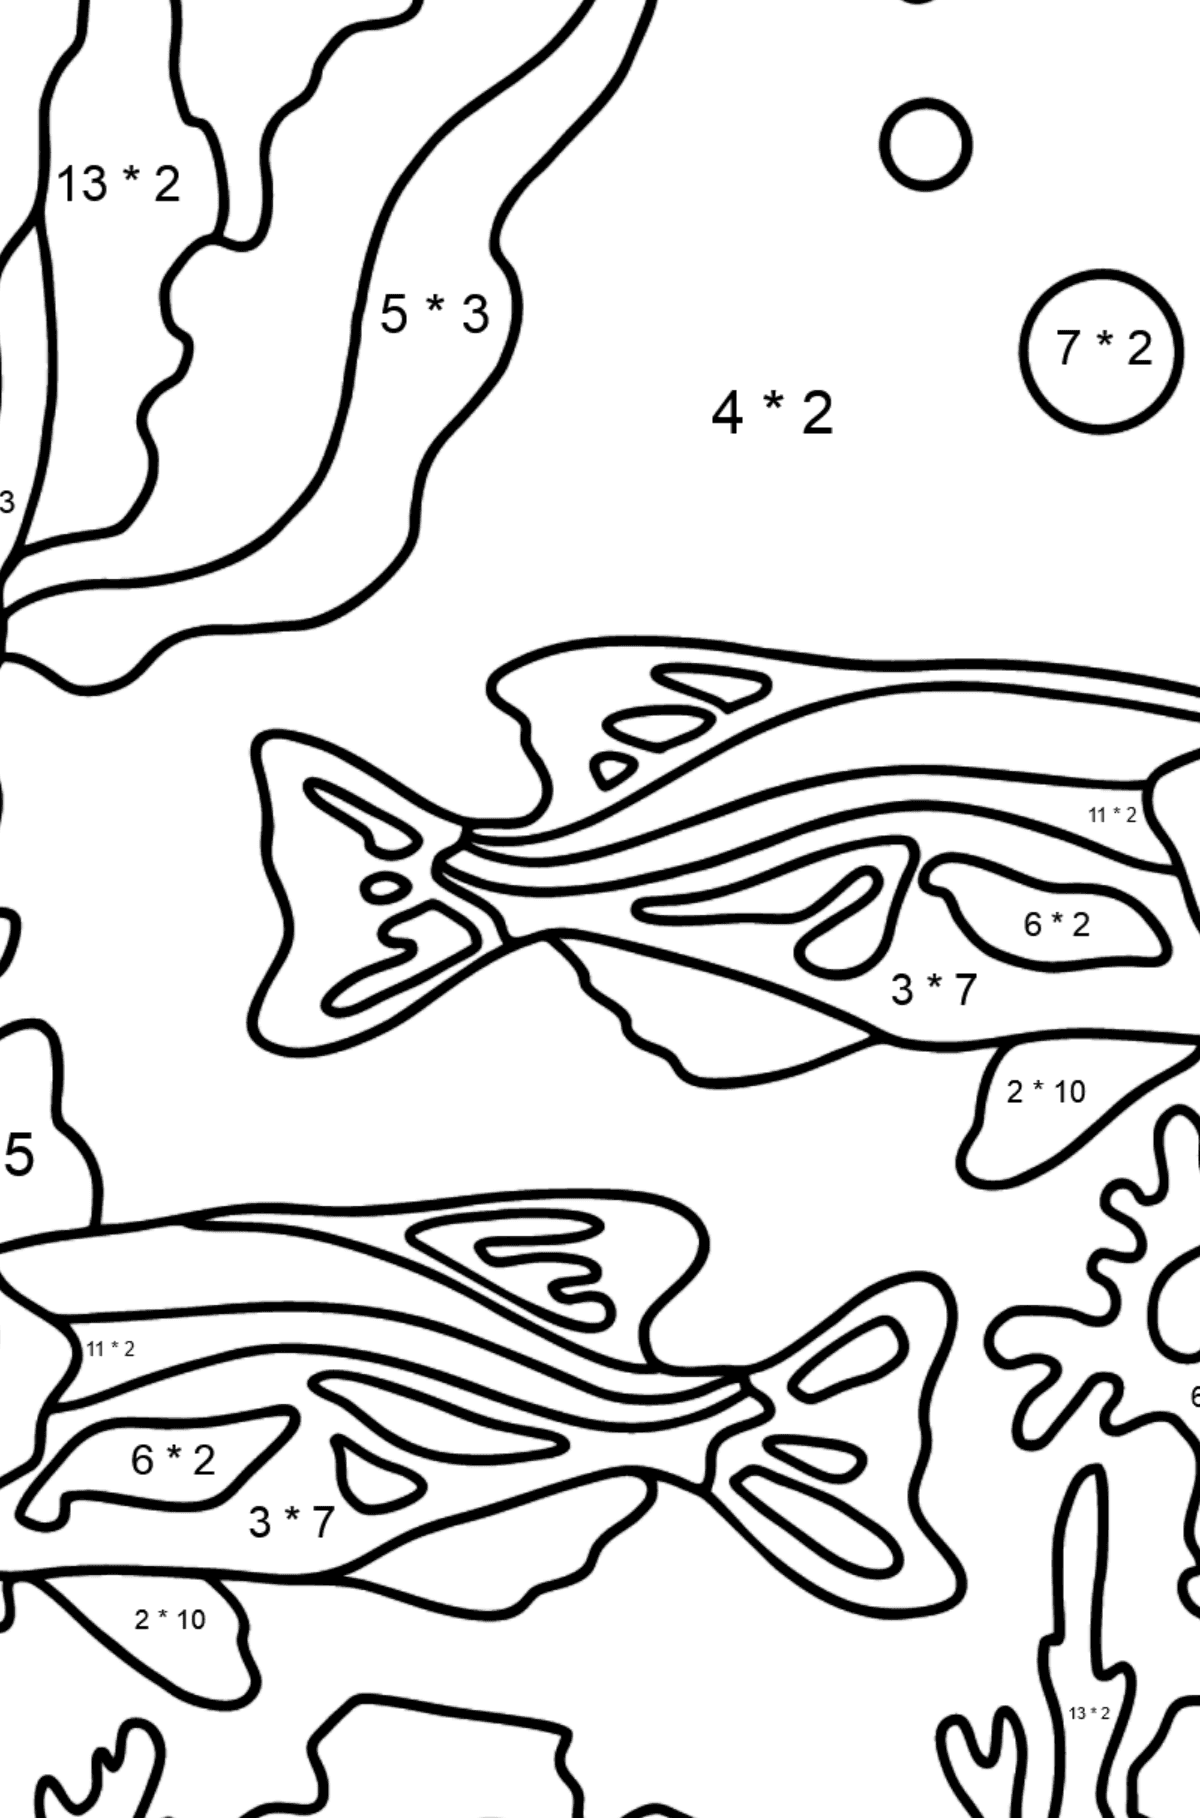 Coloring Page - Fish are Swimming Together Peacefully - Math Coloring - Multiplication for Kids